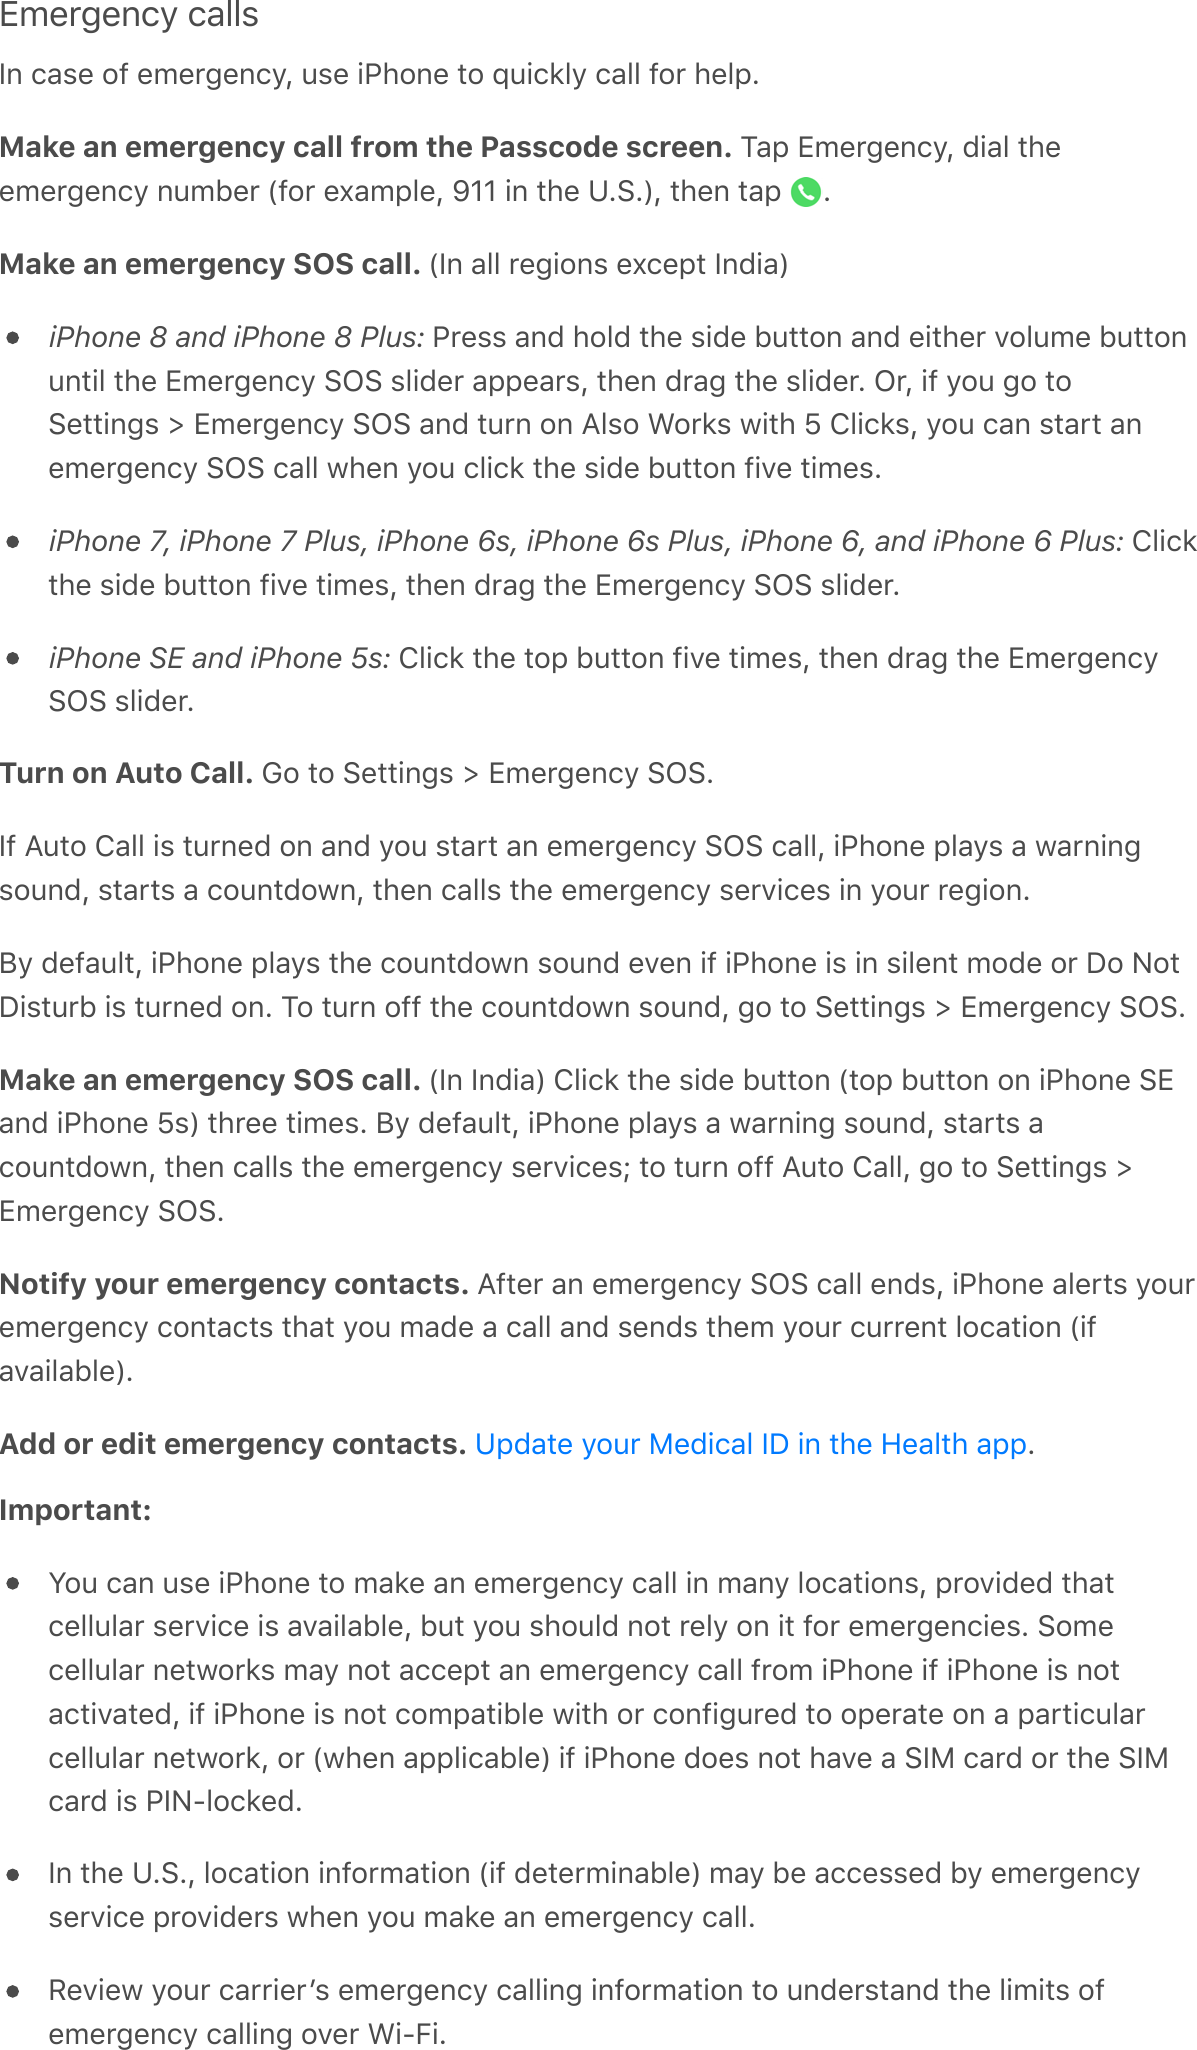 Emergency callsIn case of emergency, use iPhone to quickly call for help.Make an emergency call from the Passcode screen. Tap Emergency, dial theemergency number (for example, 911 in the U.S.), then tap  .Make an emergency SOS call. (In all regions except India)iPhone 8 and iPhone 8 Plus: Press and hold the side button and either volume buttonuntil the Emergency SOS slider appears, then drag the slider. Or, if you go toSettings &gt; Emergency SOS and turn on Also Works with 5 Clicks, you can start anemergency SOS call when you click the side button five times.iPhone 7, iPhone 7 Plus, iPhone 6s, iPhone 6s Plus, iPhone 6, and iPhone 6 Plus: Clickthe side button five times, then drag the Emergency SOS slider.iPhone SE and iPhone 5s: Click the top button five times, then drag the EmergencySOS slider.Turn on Auto Call. Go to Settings &gt; Emergency SOS.If Auto Call is turned on and you start an emergency SOS call, iPhone plays a warningsound, starts a countdown, then calls the emergency services in your region.By default, iPhone plays the countdown sound even if iPhone is in silent mode or Do NotDisturb is turned on. To turn off the countdown sound, go to Settings &gt; Emergency SOS.Make an emergency SOS call. (In India) Click the side button (top button on iPhone SEand iPhone 5s) three times. By default, iPhone plays a warning sound, starts acountdown, then calls the emergency services; to turn off Auto Call, go to Settings &gt;Emergency SOS.Notify your emergency contacts. After an emergency SOS call ends, iPhone alerts youremergency contacts that you made a call and sends them your current location (ifavailable).Add or edit emergency contacts.  .Important:  You can use iPhone to make an emergency call in many locations, provided thatcellular service is available, but you should not rely on it for emergencies. Somecellular networks may not accept an emergency call from iPhone if iPhone is notactivated, if iPhone is not compatible with or configured to operate on a particularcellular network, or (when applicable) if iPhone does not have a SIM card or the SIMcard is PIN-locked.In the U.S., location information (if determinable) may be accessed by emergencyservice providers when you make an emergency call.Review your carrierʼs emergency calling information to understand the limits ofemergency calling over Wi-Fi.Update your Medical ID in the Health app